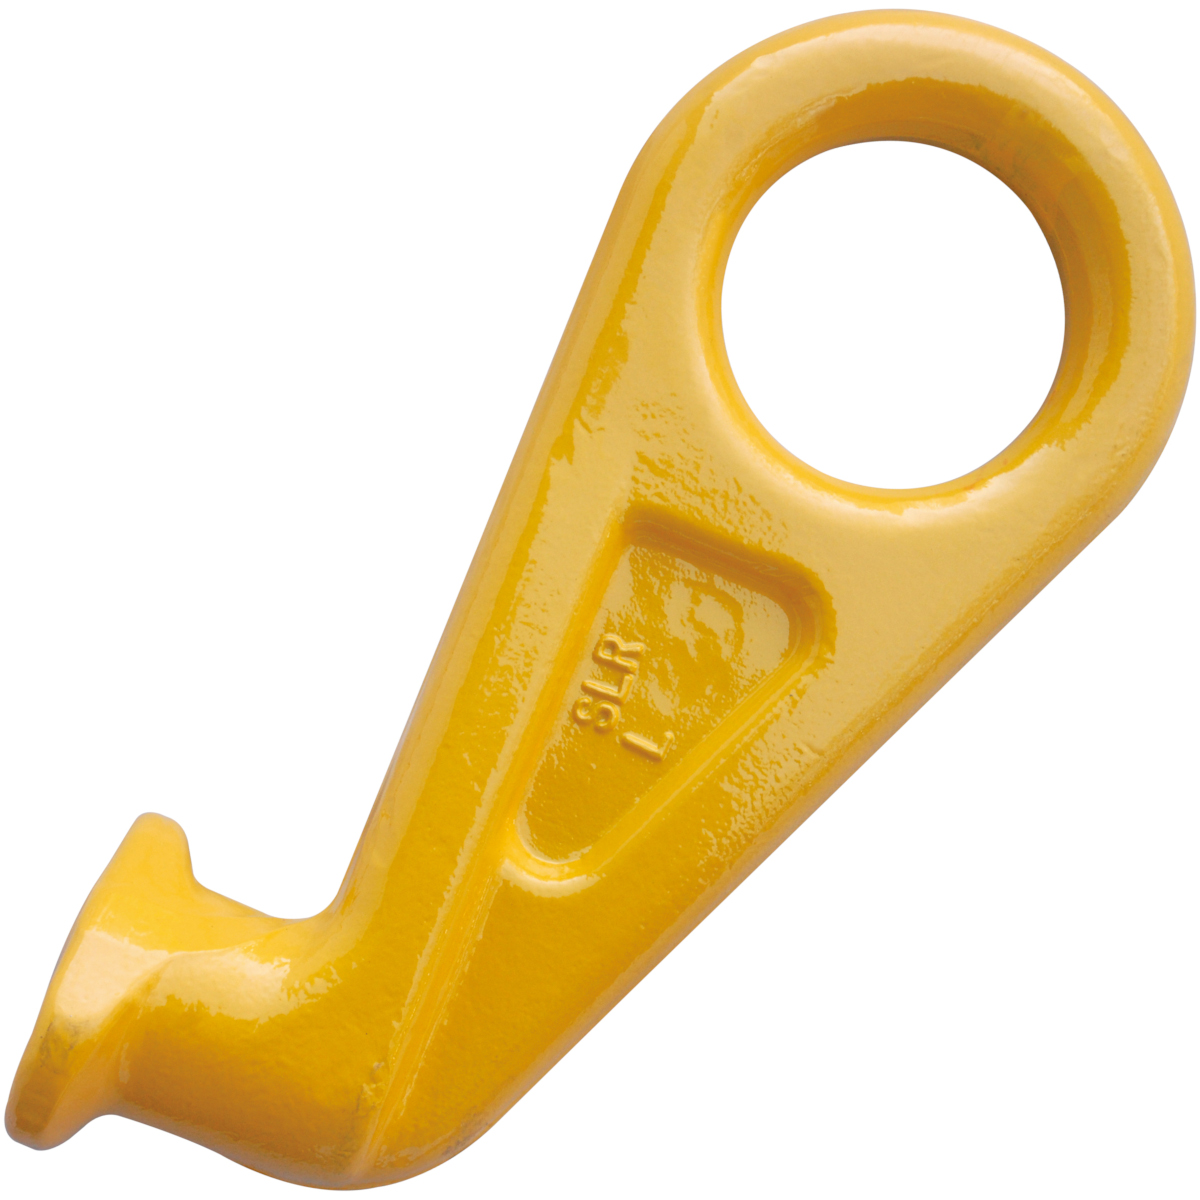 https://www.yellowlifting.com/images/large/yl/container_hook_left_LRG.jpg